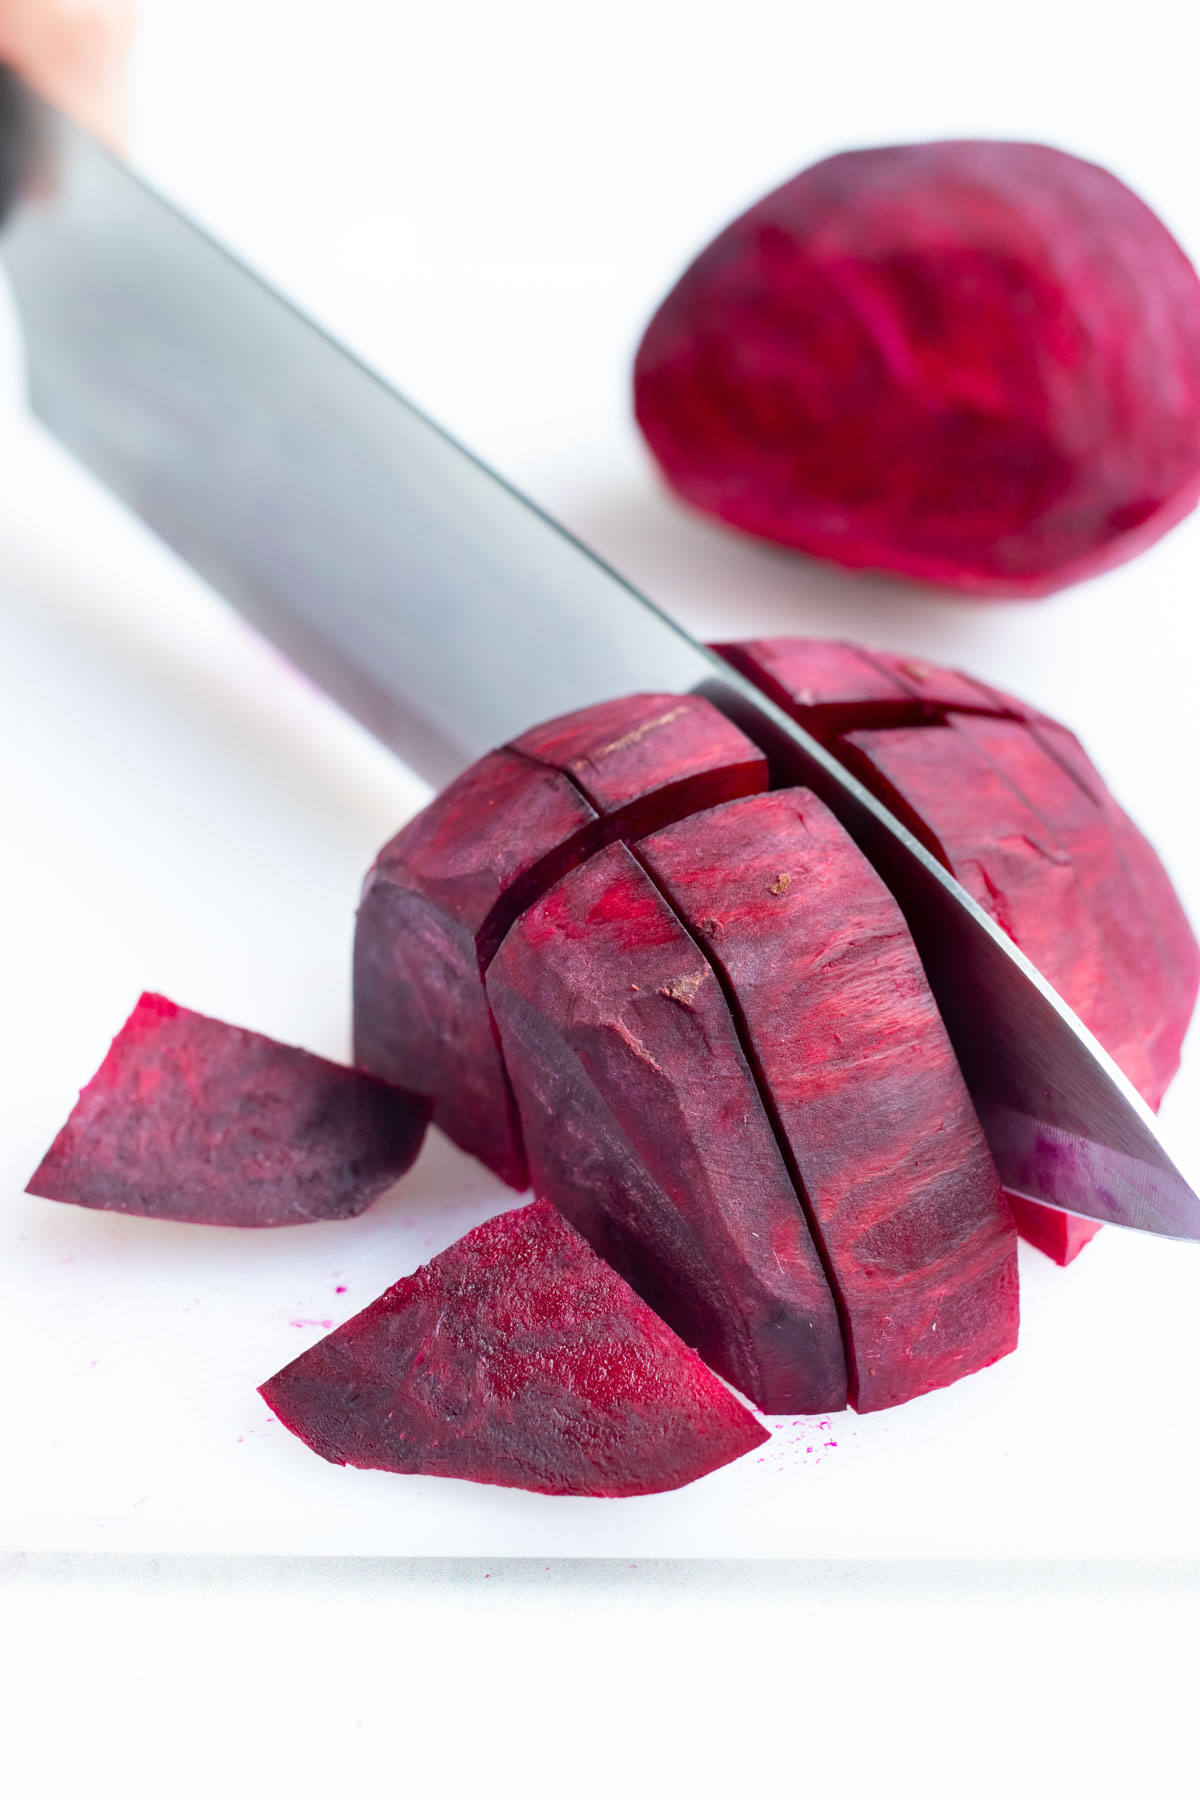 Peeled beets are sliced into chunks.